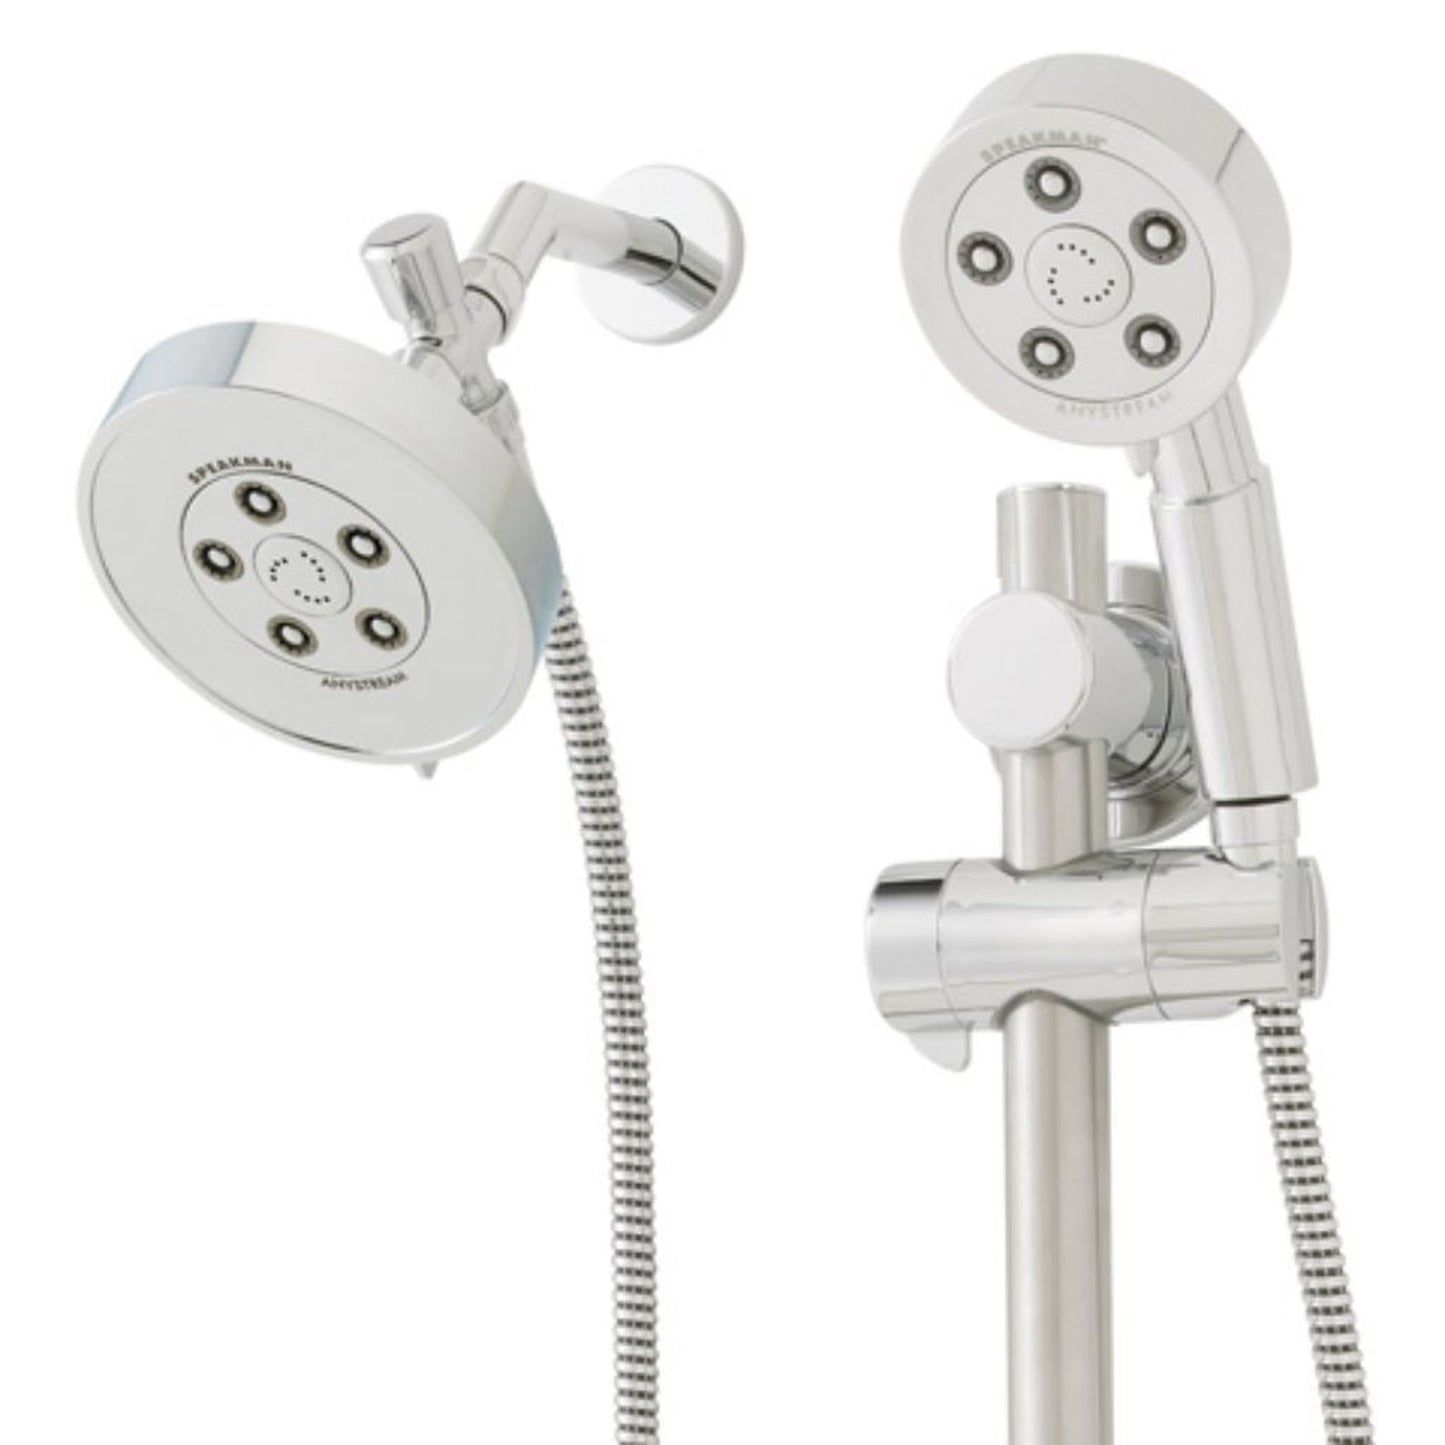 Speakman Neo 2.5 GPM Polished Chrome Anystream Shower Head and Slide Bar Combination Shower System